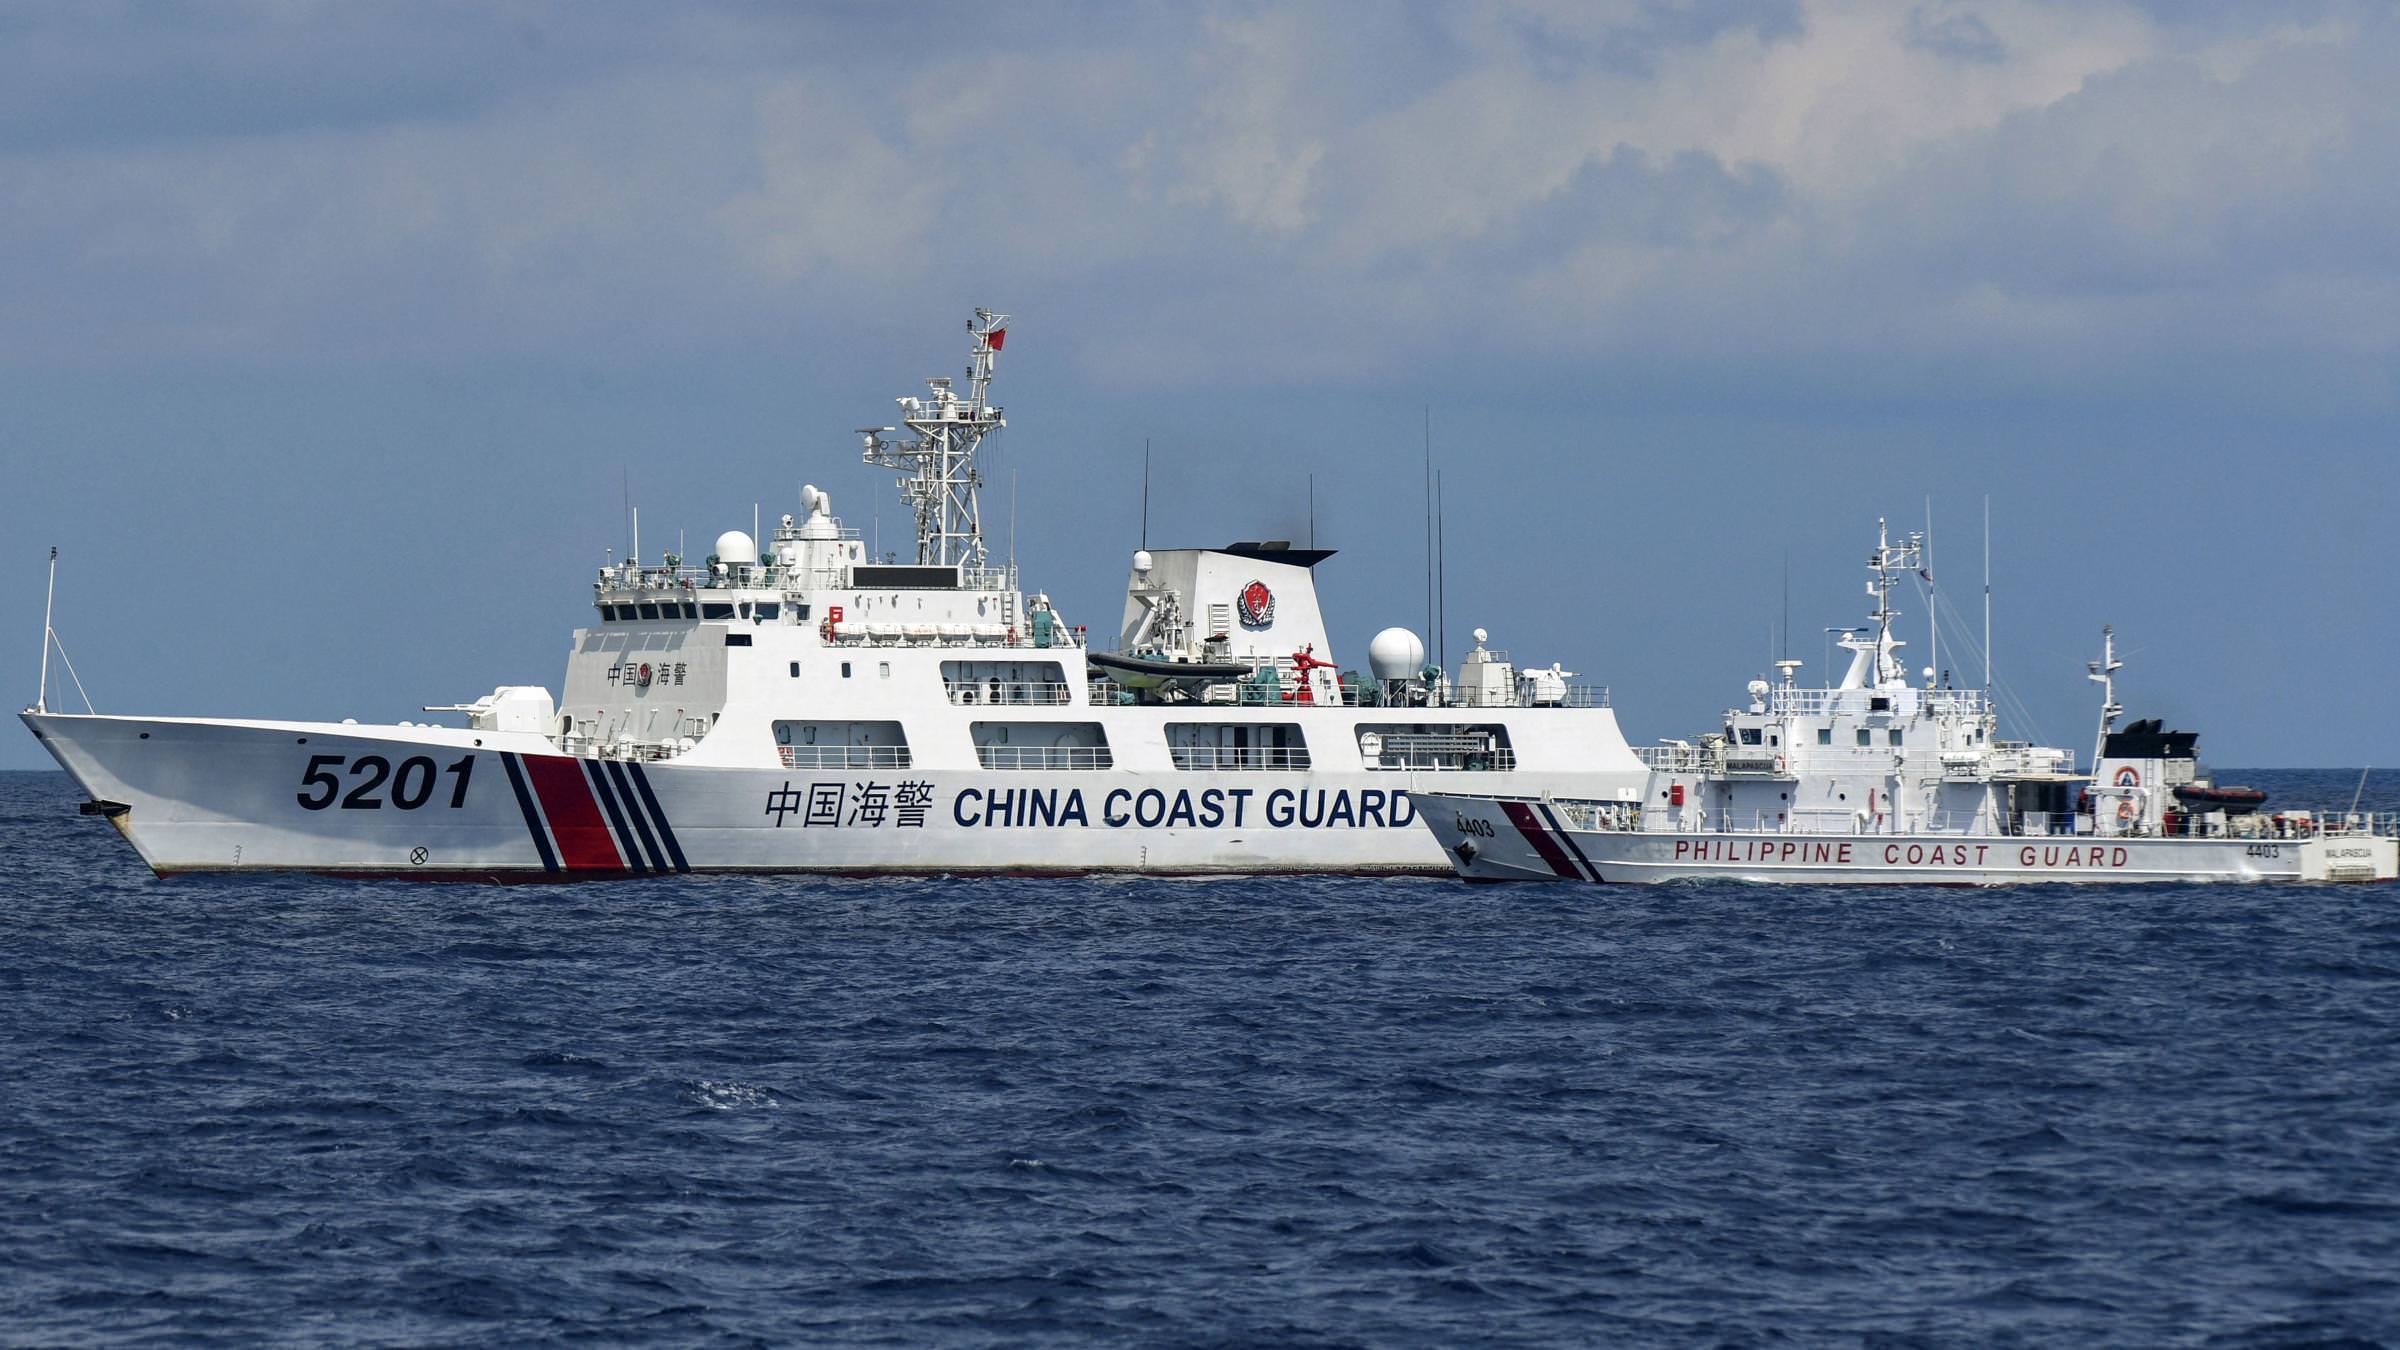 Chinese And Philippine Coast Guards Nearly Collide